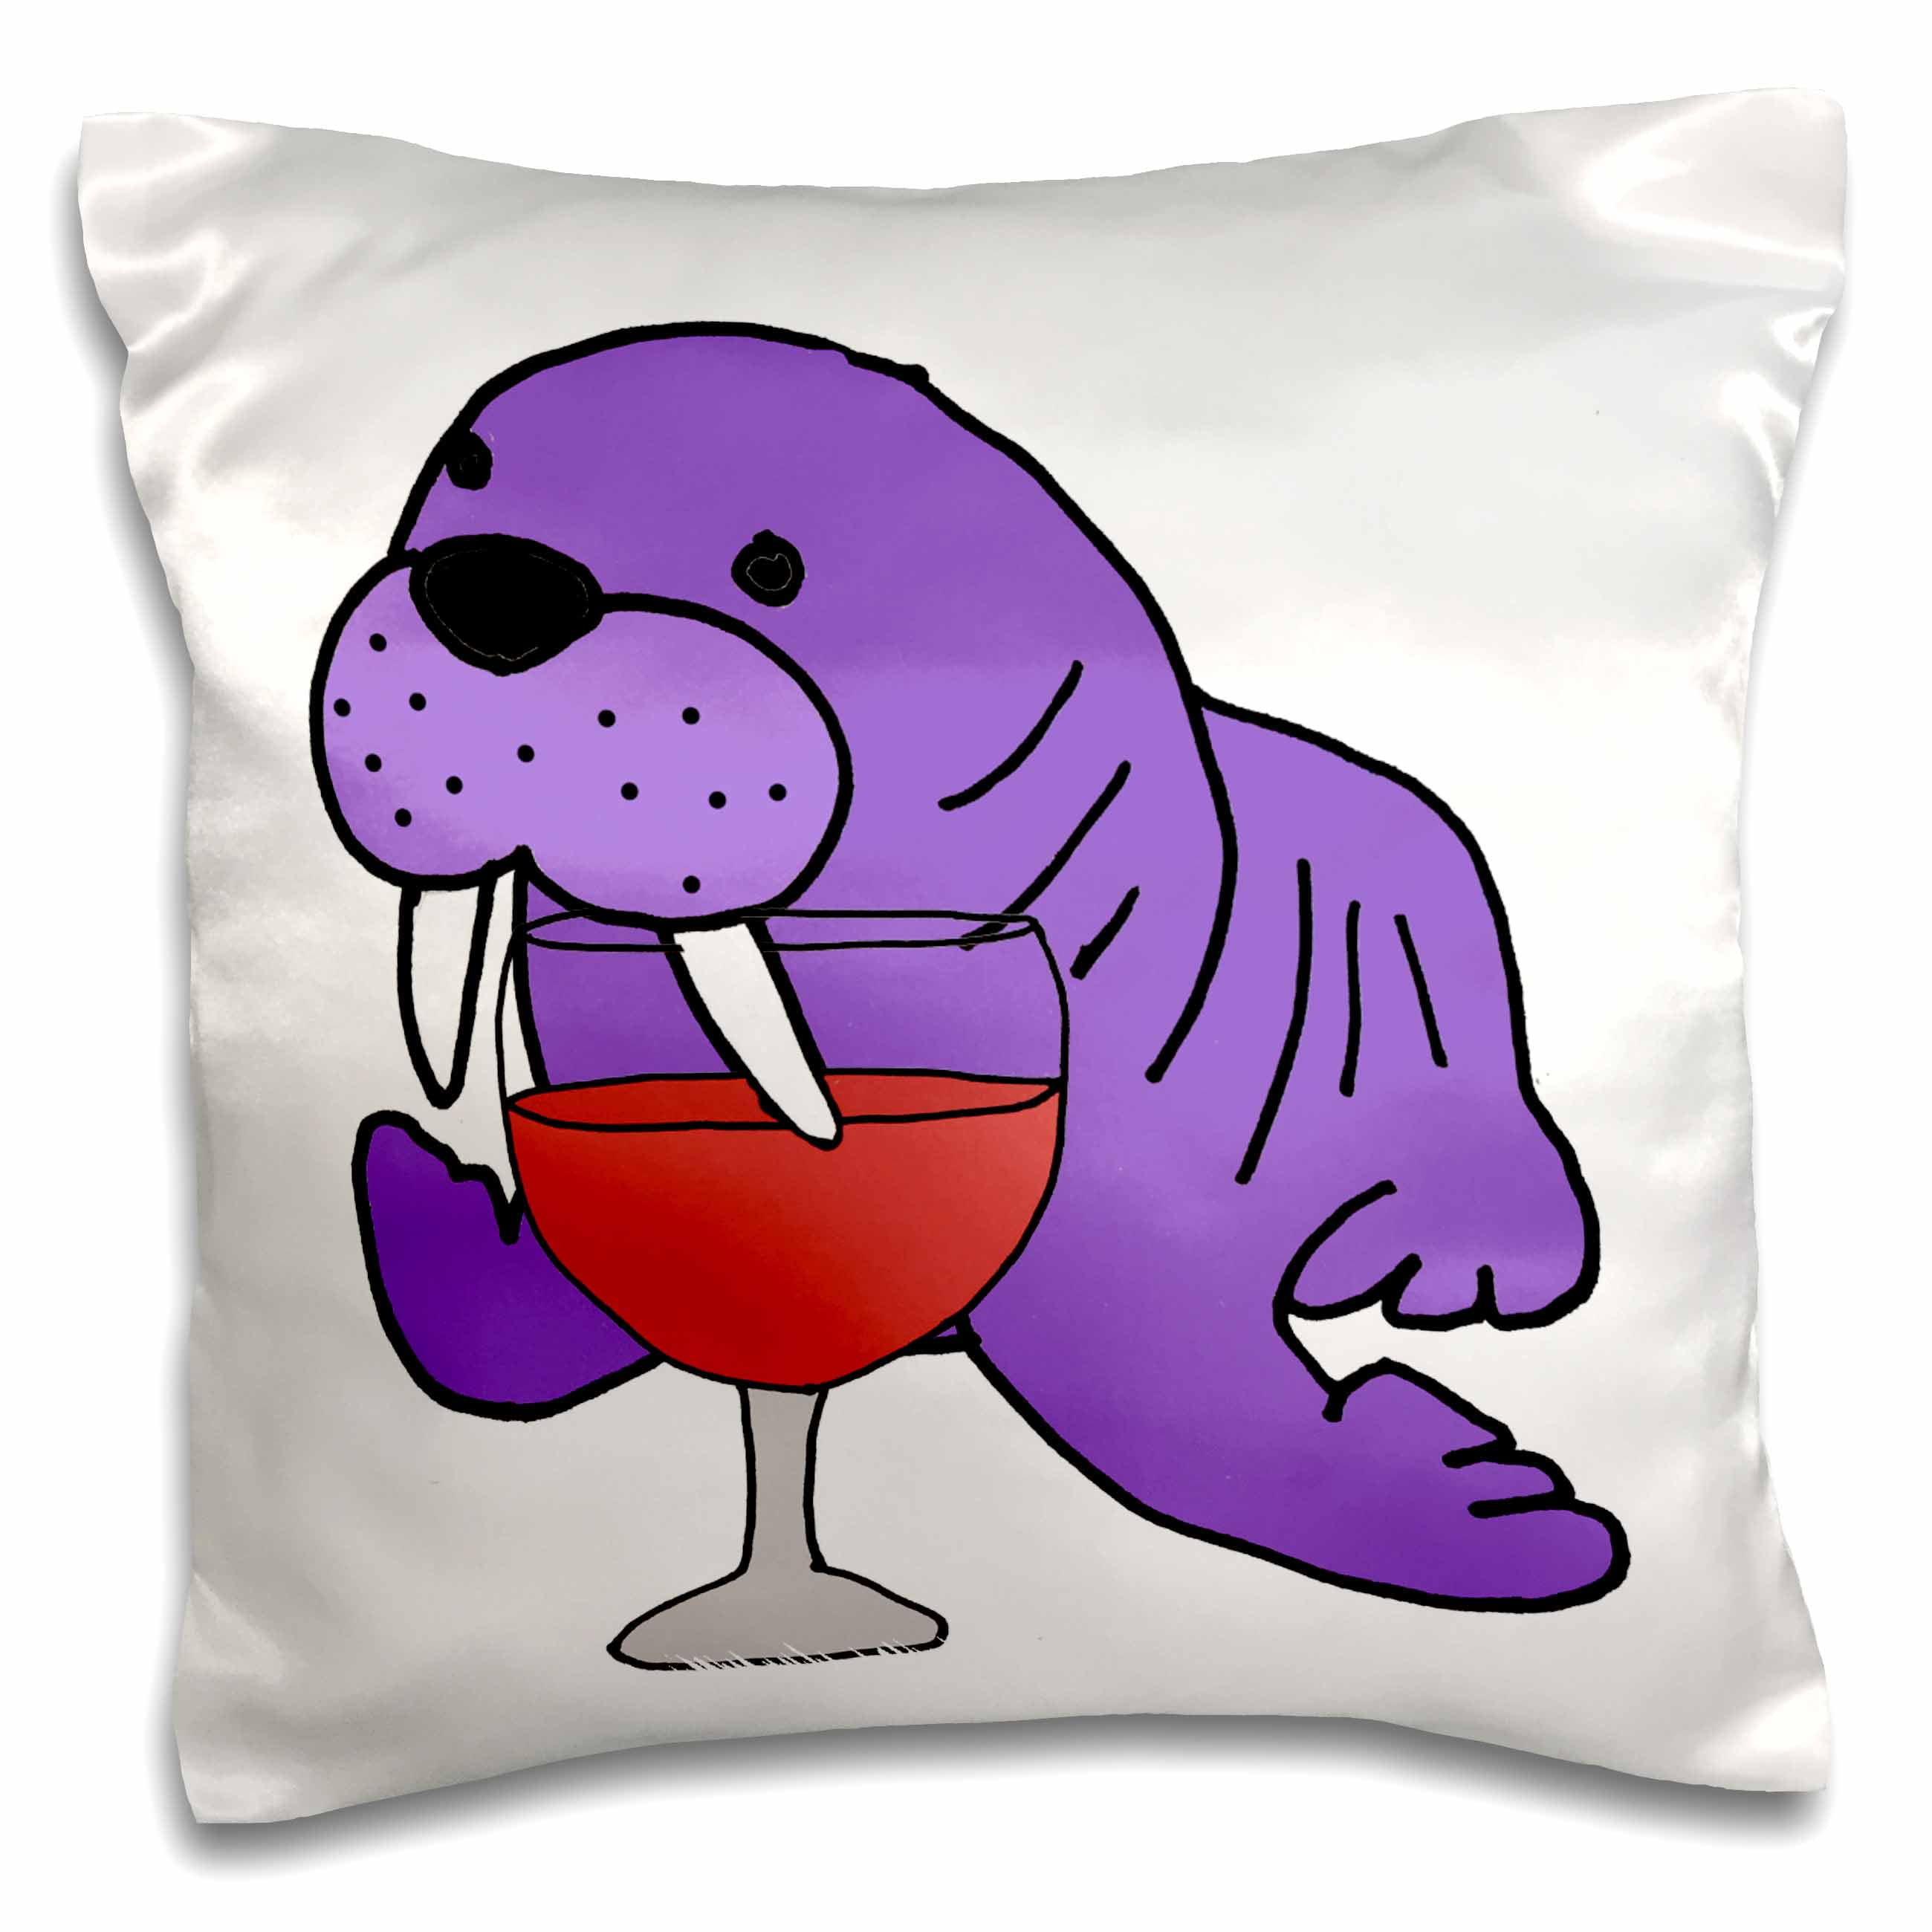 Funny Wine Graphic & More May Contain Wine Funny Drinker Graphic Throw Pillow Multicolor 16x16 